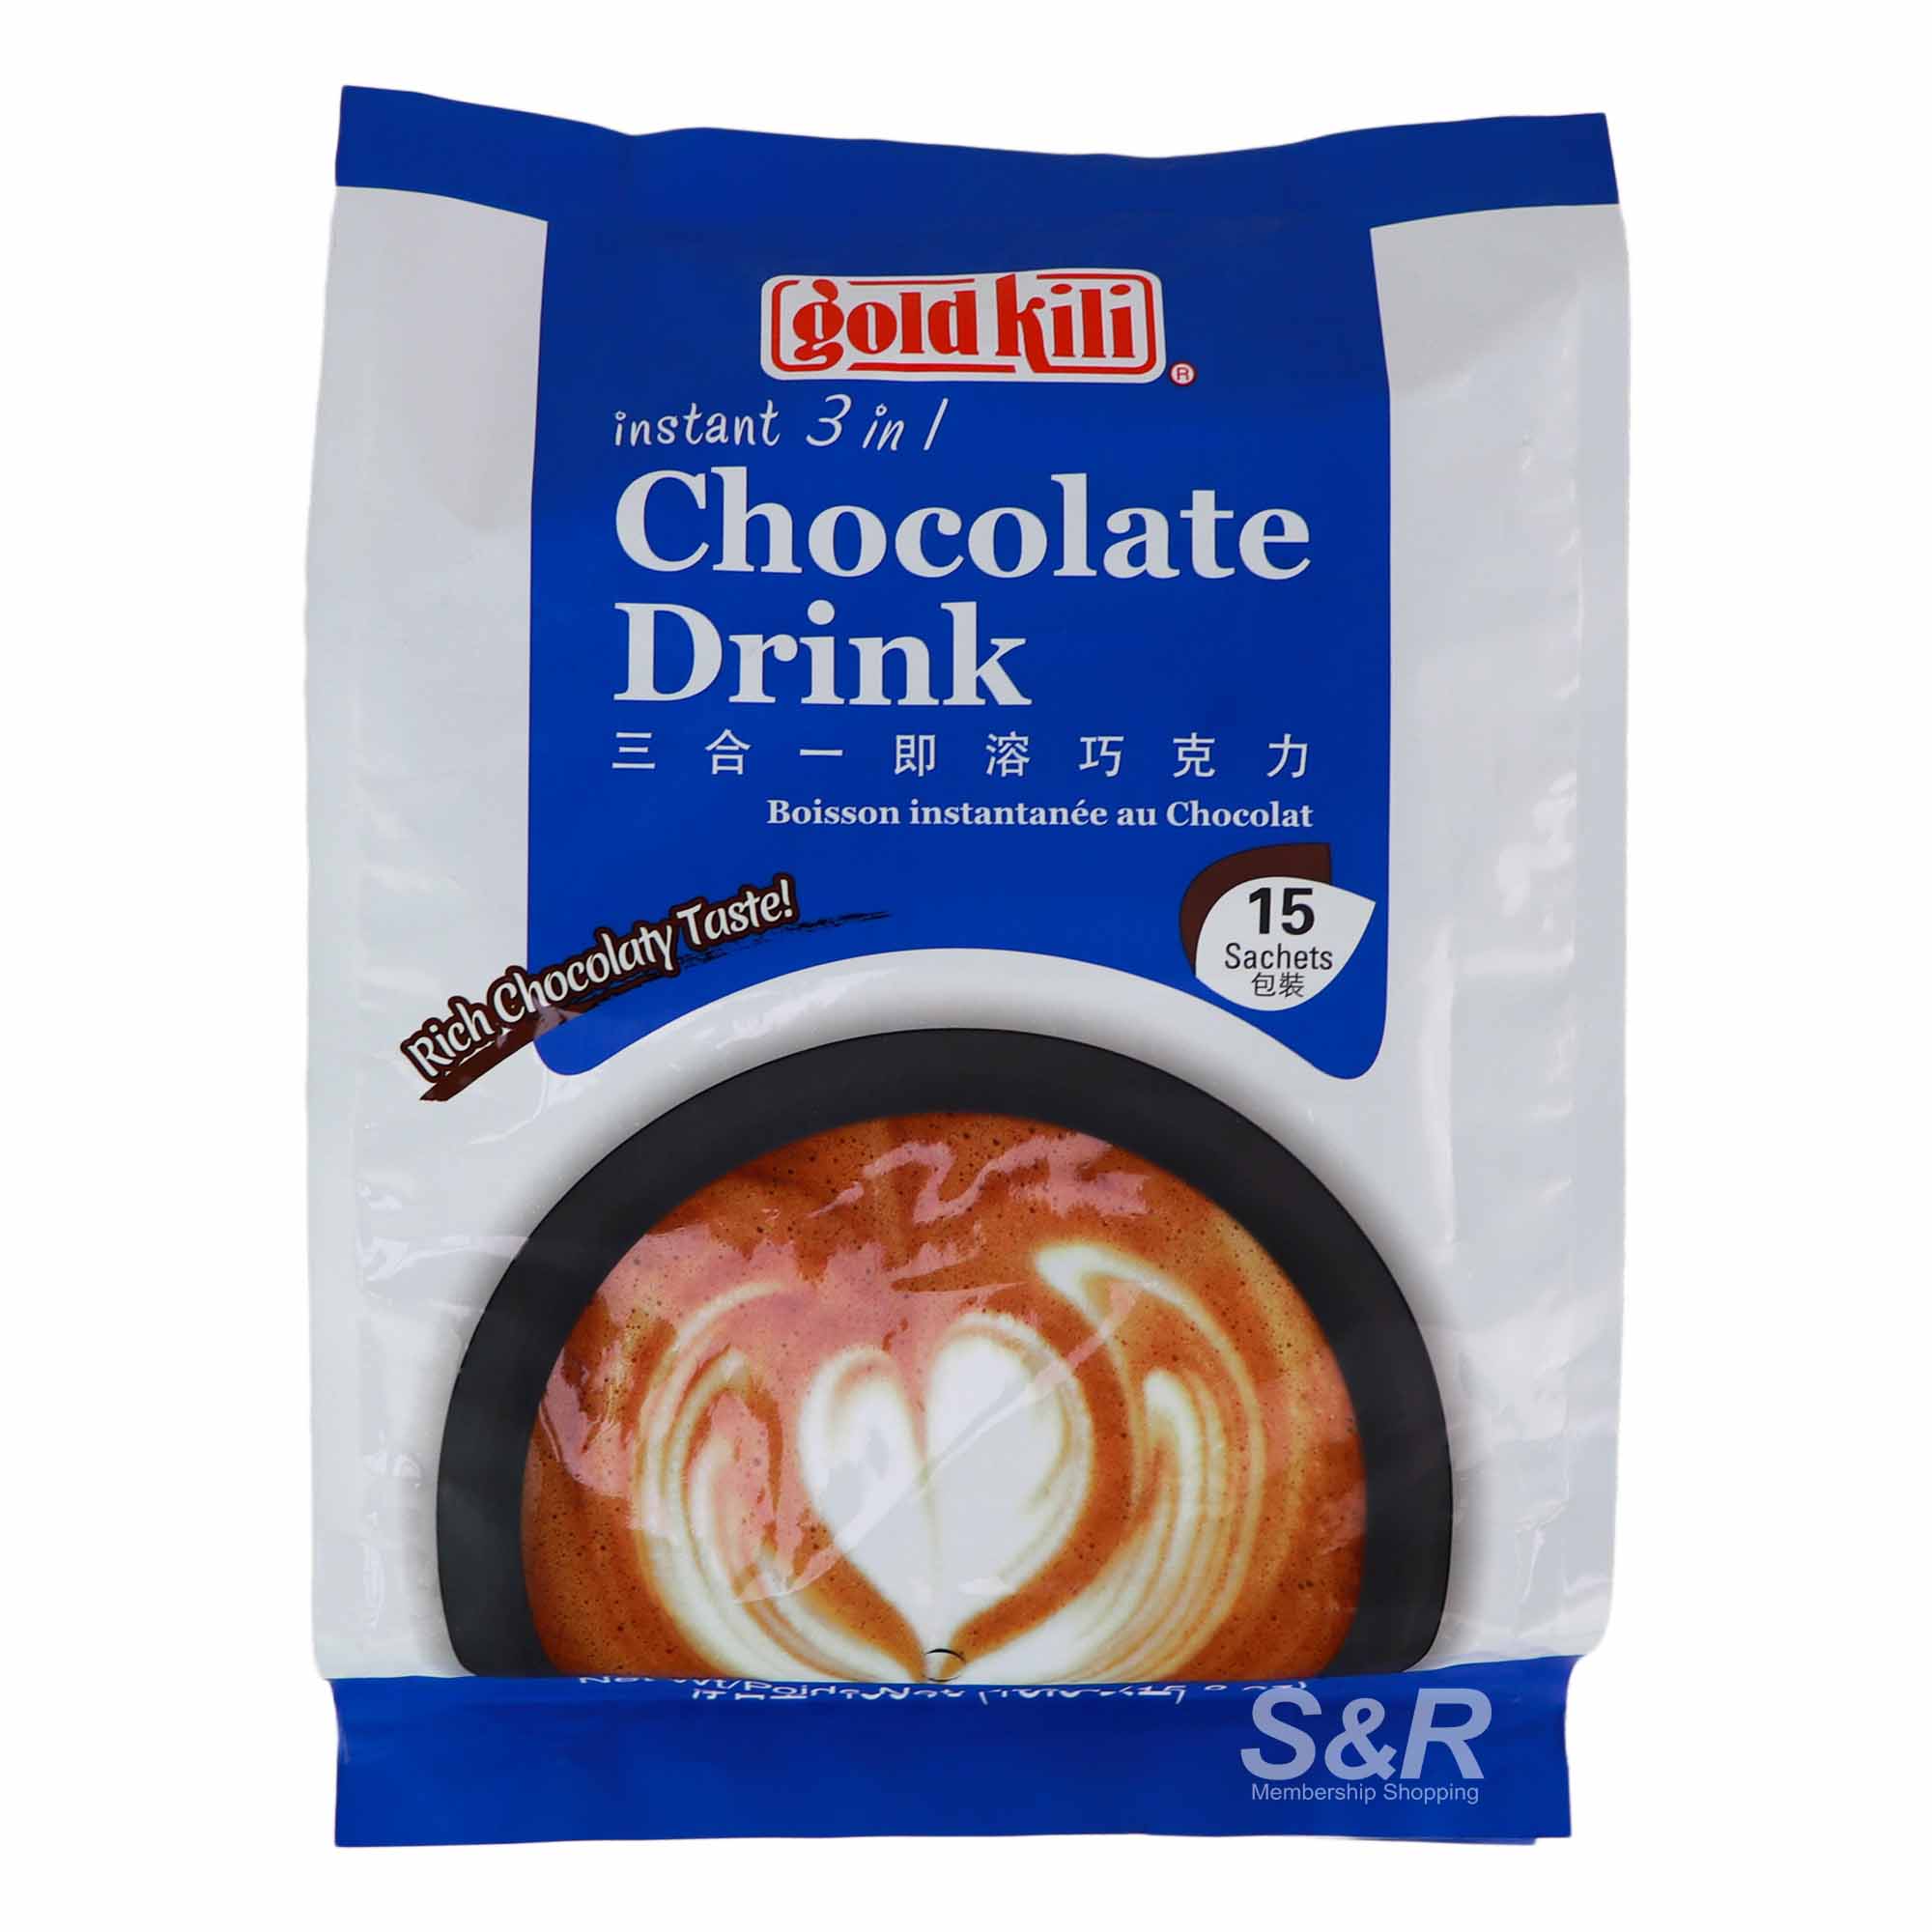 Gold Kili Instant 3-in-1 Chocolate Drink 15pcs